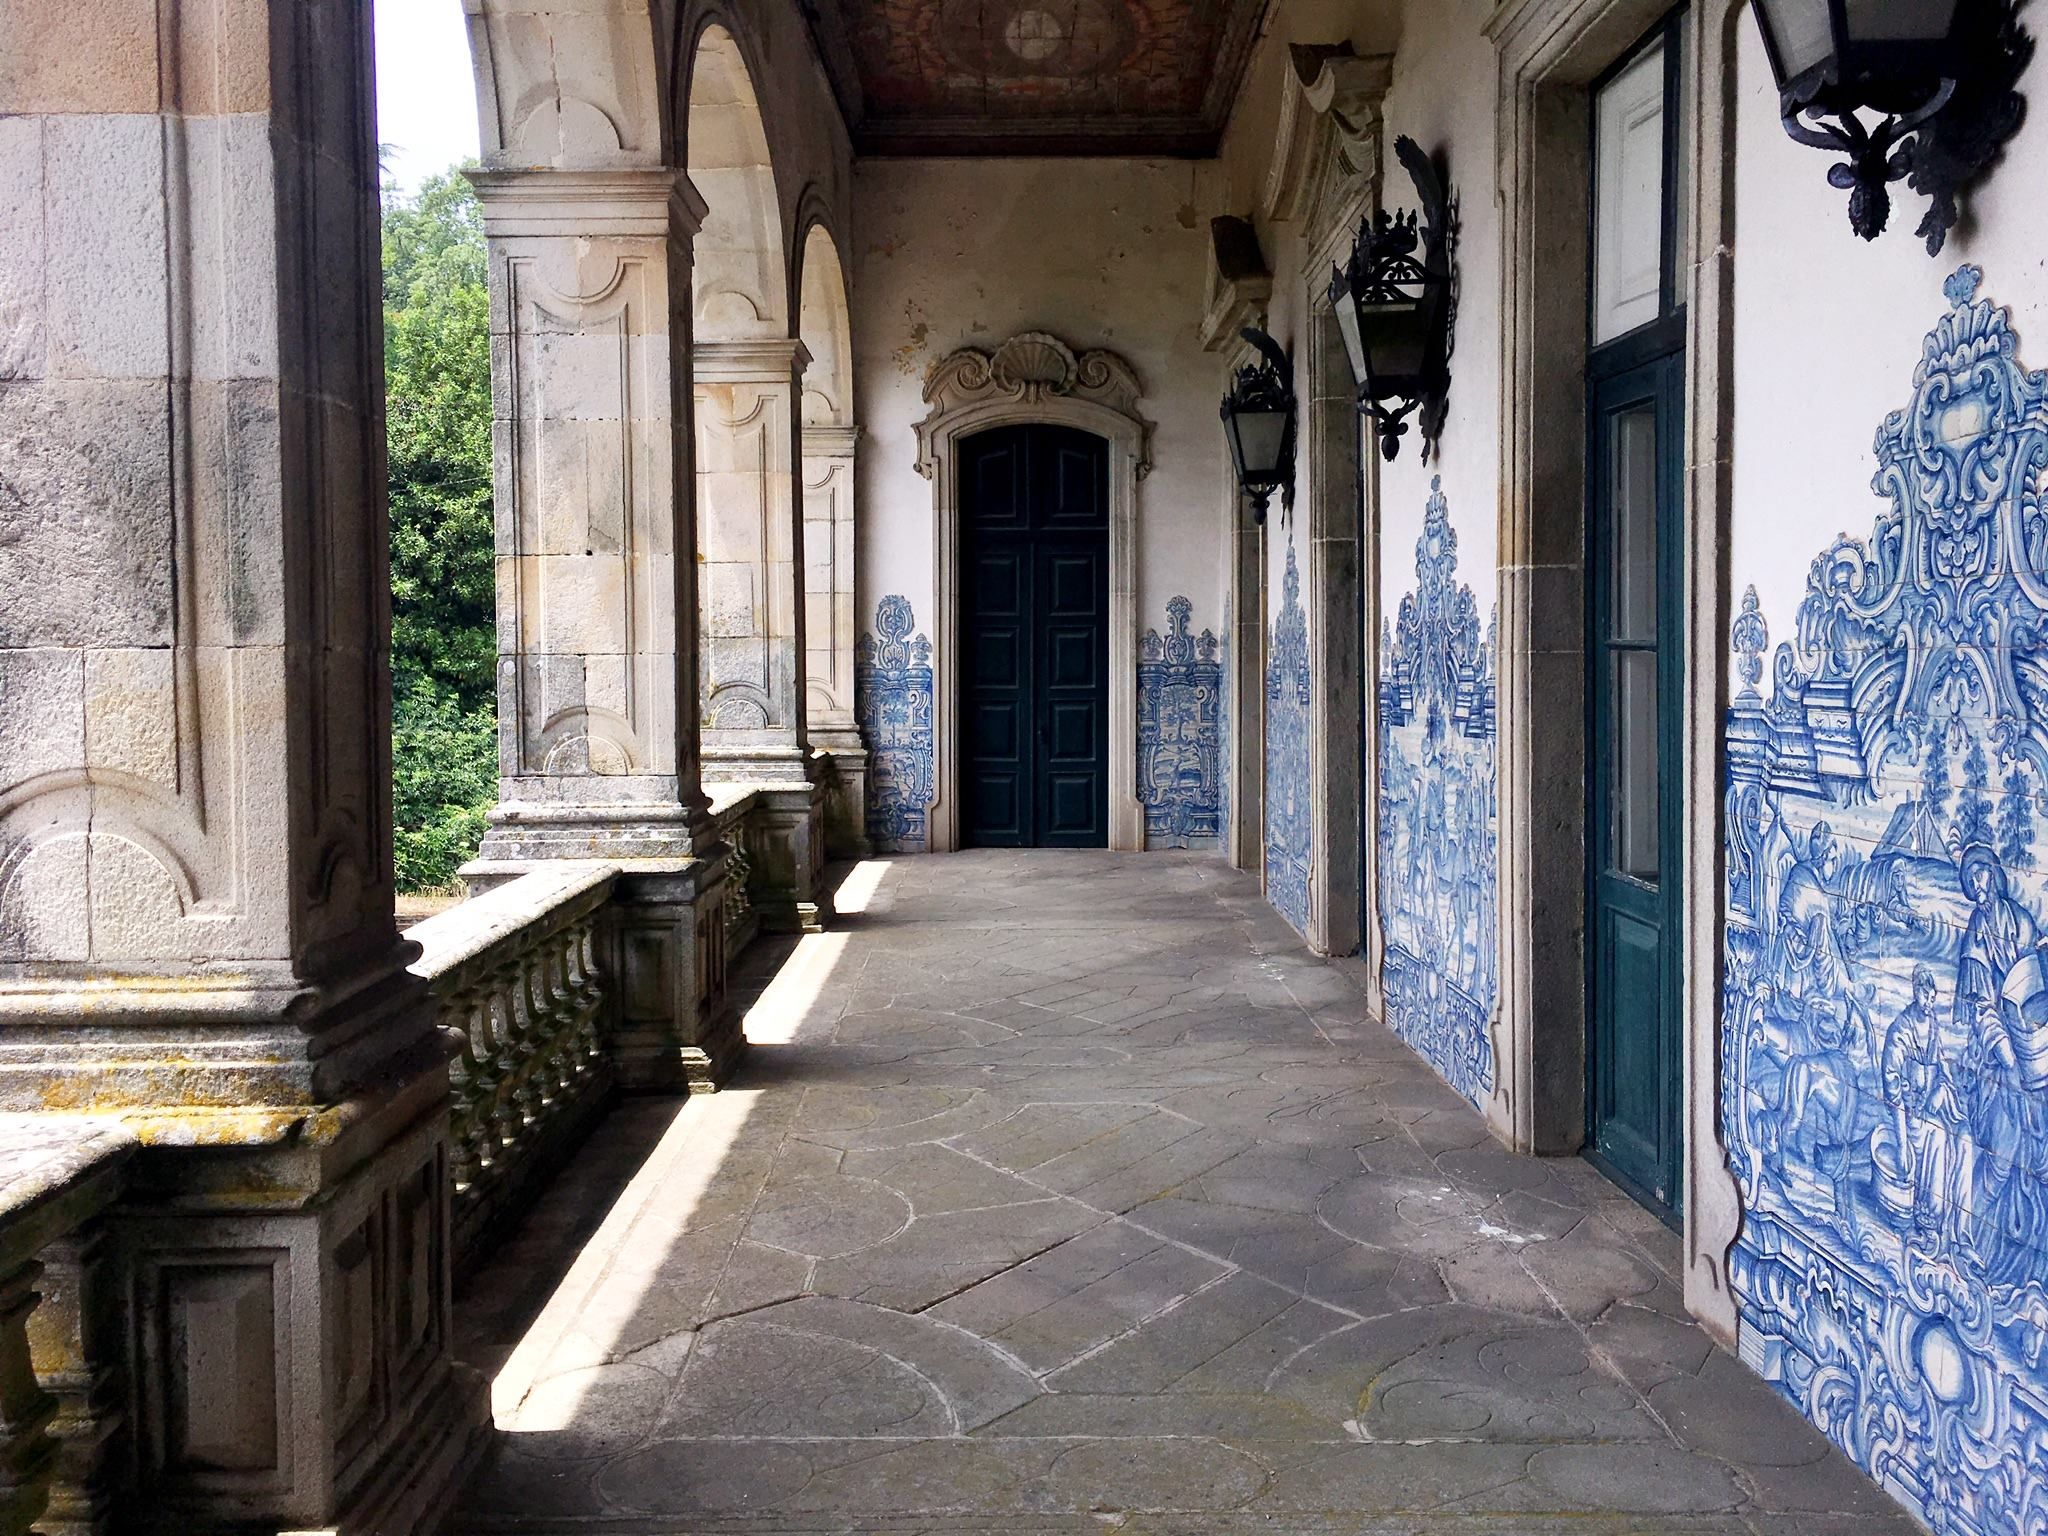 A loggia with a tile wall.